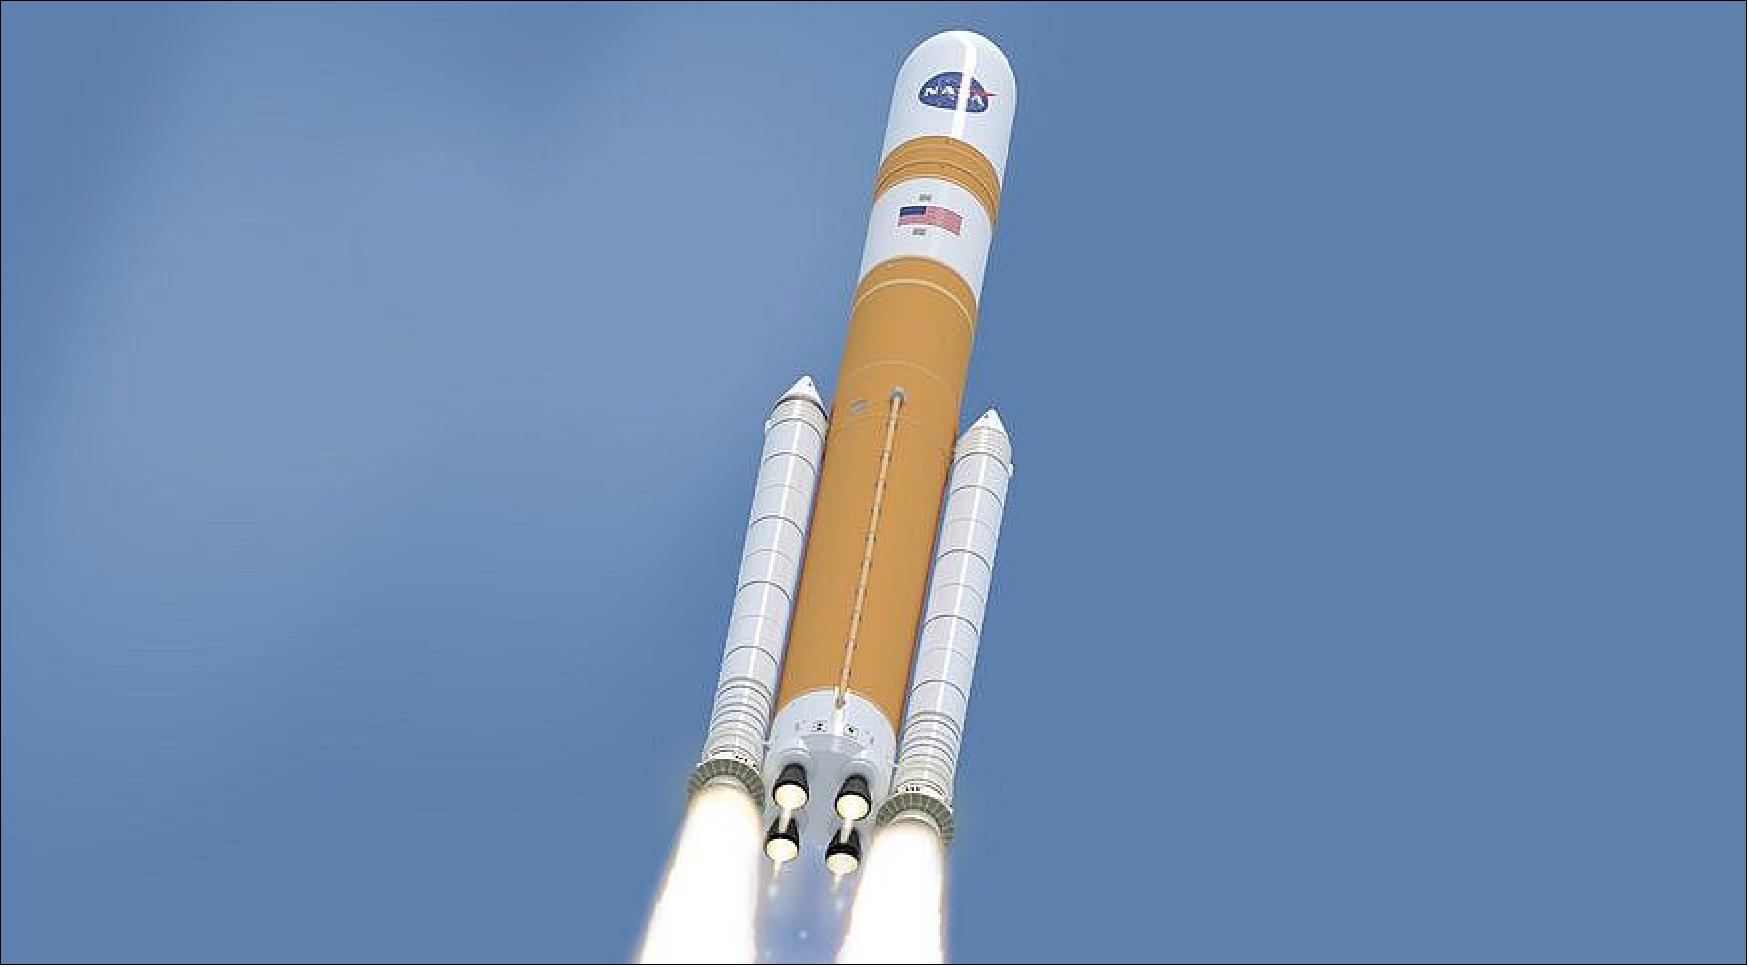 Figure 14: While NASA is developing a cargo version of the SLS that could be used for science missions, the limited supply chain and requirements of the Artemis program will limit its use to missions launching no earlier than the late 2020s (image credit: NASA)